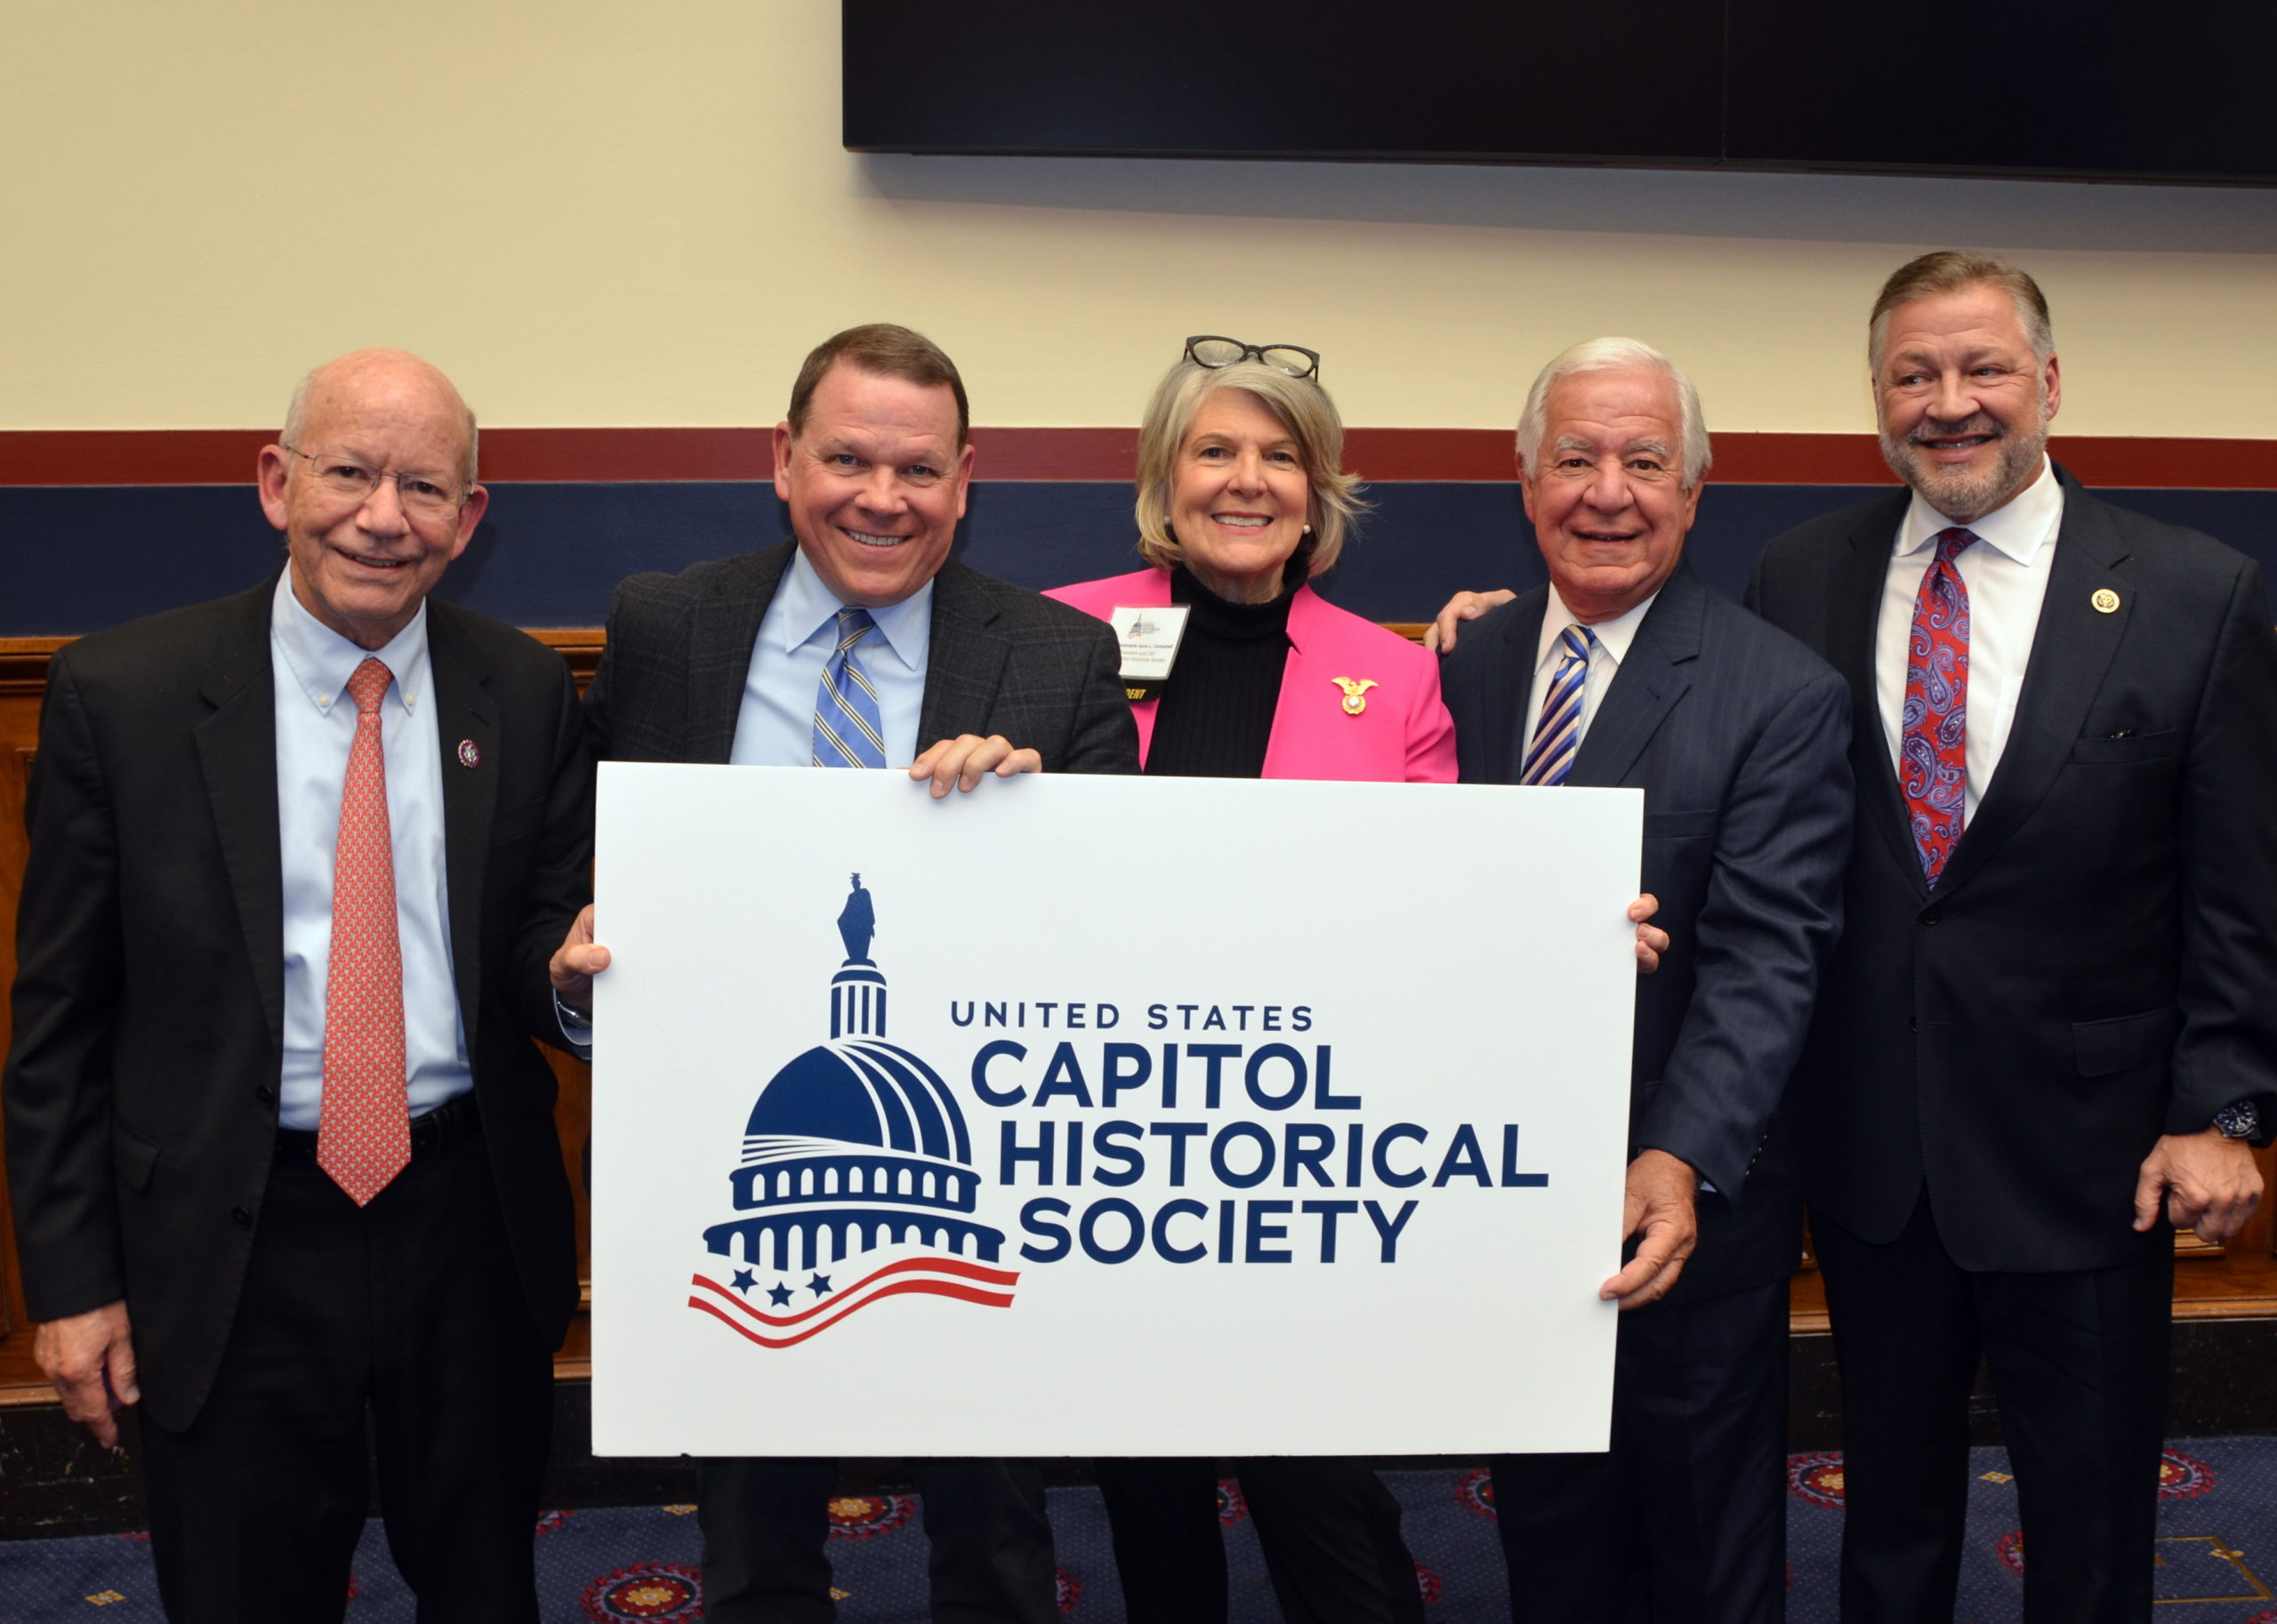 Chairman DeFazio and Ranking Member Graves, and former Representatives Shuster and Rahall reflected on their time with the House T&I Committee.

Photos (c) Bruce Guthrie